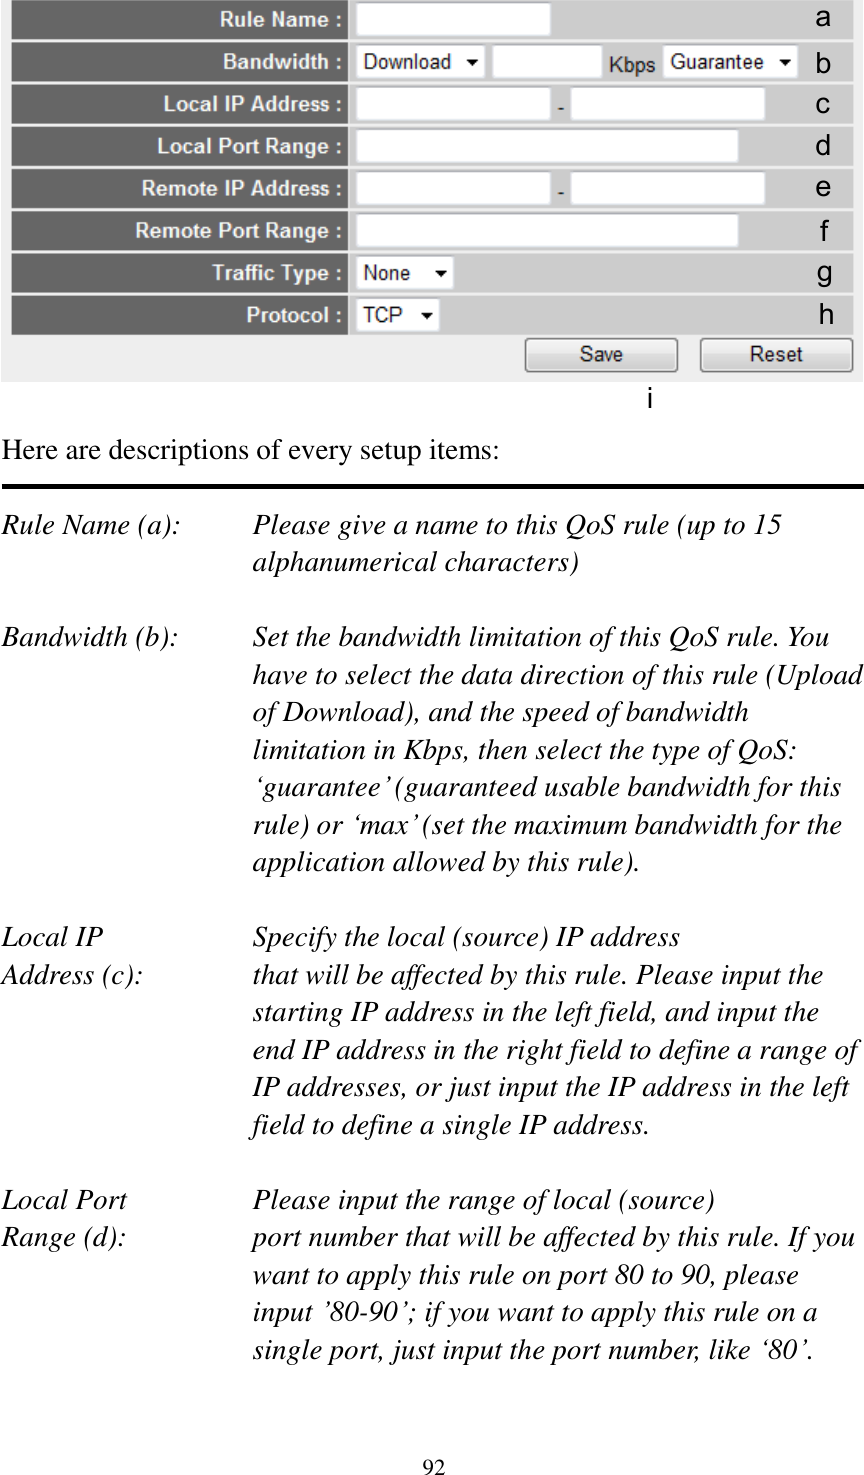 92   Here are descriptions of every setup items:  Rule Name (a):    Please give a name to this QoS rule (up to 15 alphanumerical characters)  Bandwidth (b):    Set the bandwidth limitation of this QoS rule. You have to select the data direction of this rule (Upload of Download), and the speed of bandwidth limitation in Kbps, then select the type of QoS: „guarantee‟ (guaranteed usable bandwidth for this rule) or „max‟ (set the maximum bandwidth for the application allowed by this rule).  Local IP        Specify the local (source) IP address Address (c):     that will be affected by this rule. Please input the starting IP address in the left field, and input the end IP address in the right field to define a range of IP addresses, or just input the IP address in the left field to define a single IP address.  Local Port       Please input the range of local (source) Range (d):    port number that will be affected by this rule. If you want to apply this rule on port 80 to 90, please input ‟80-90‟; if you want to apply this rule on a single port, just input the port number, like „80‟.  a b c d e f g h i 